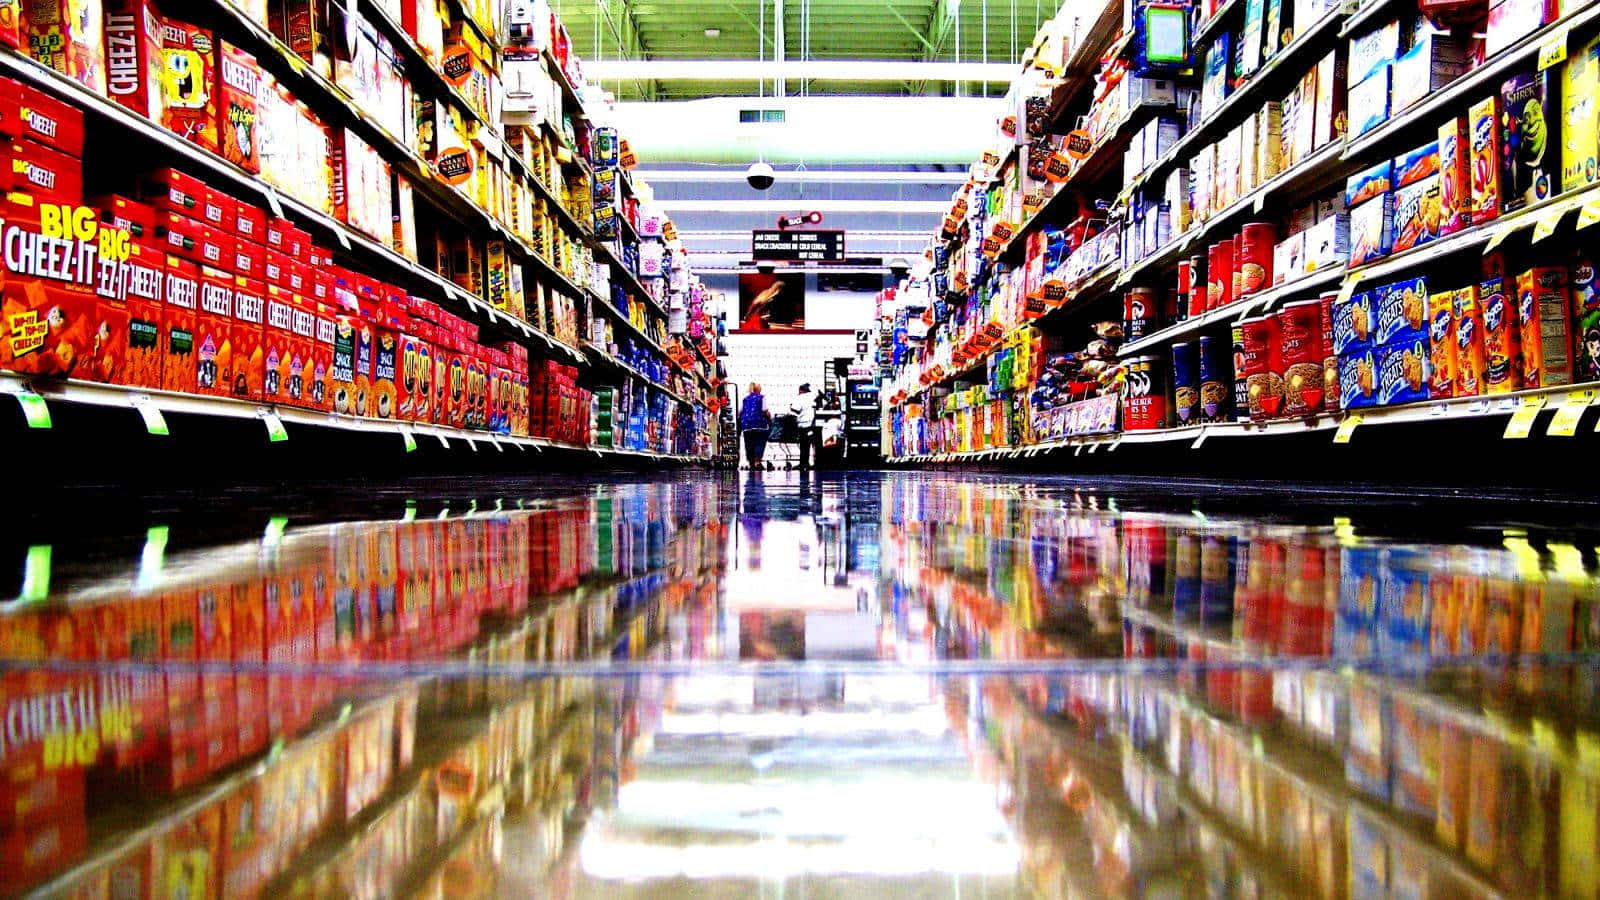 Grocery Background